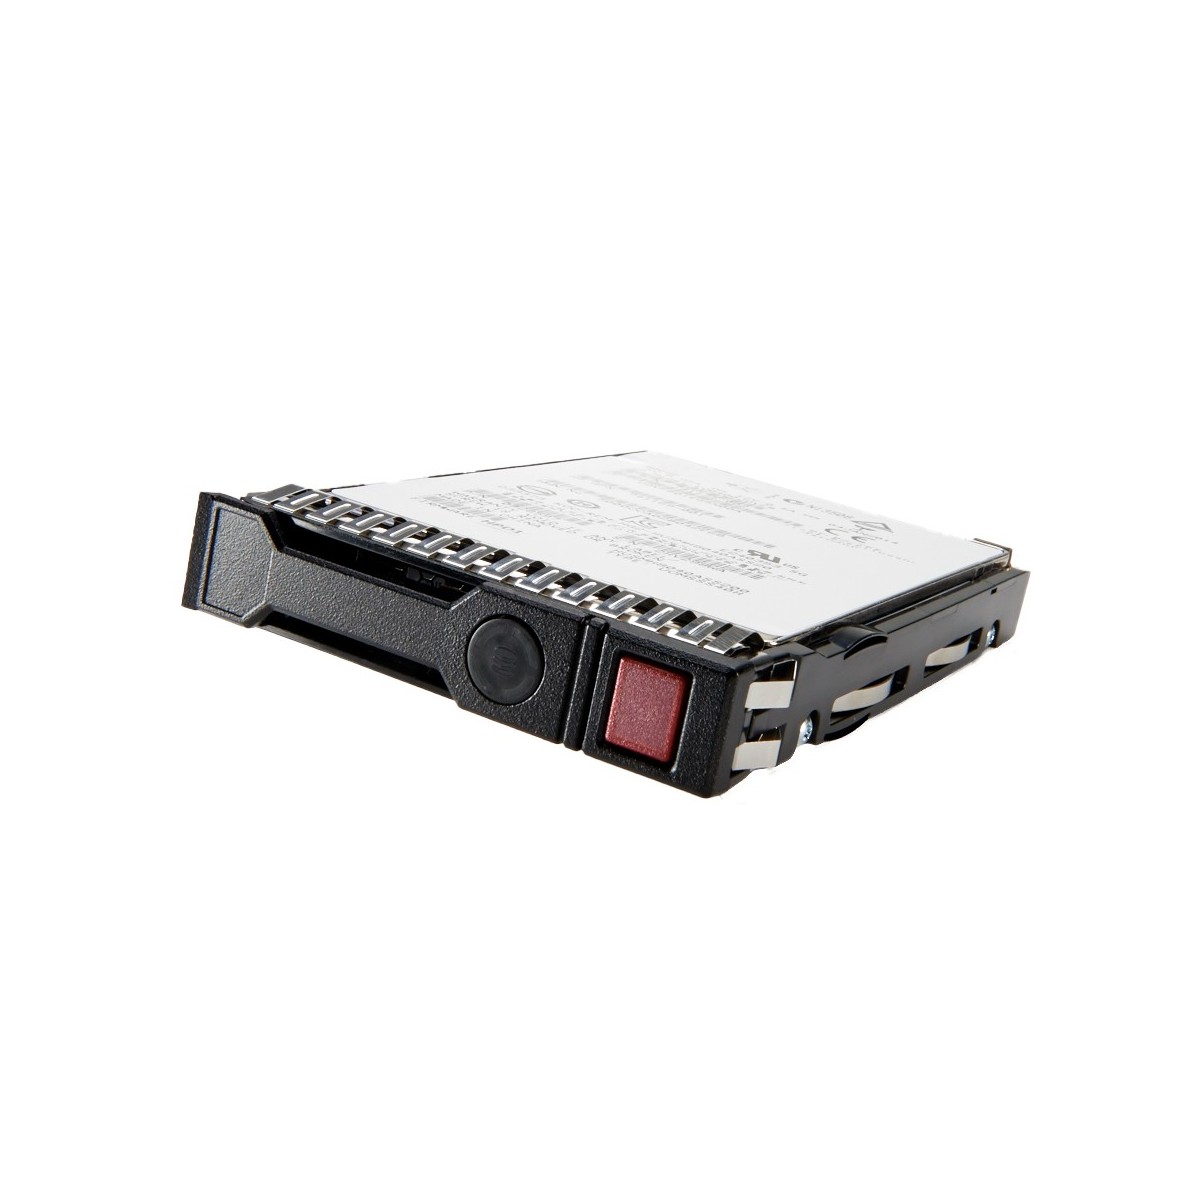 HPE 300GB SAS hard disk drive - Hdd - Serial Attached SCSI (SAS)